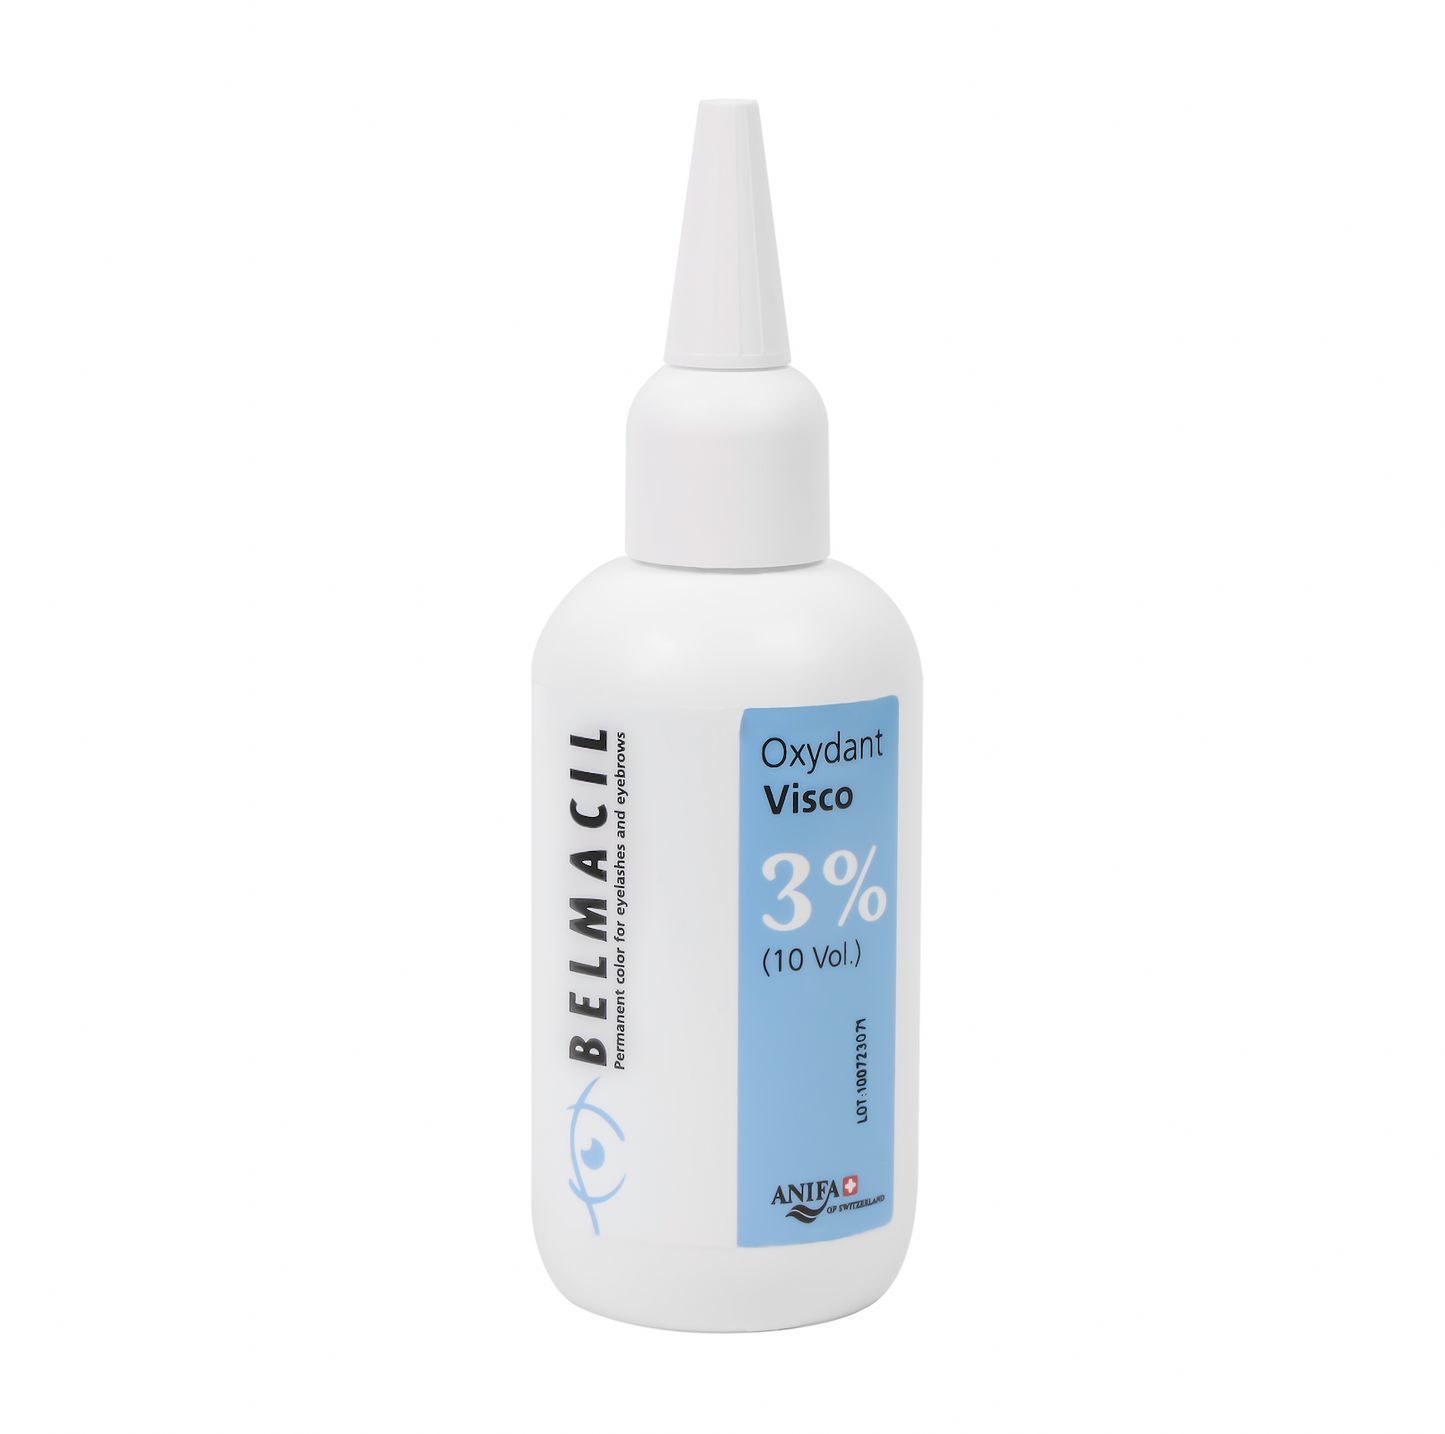 Belmacil Oxidant for lash and brow tints 100ml | 3% peroxide tint developer